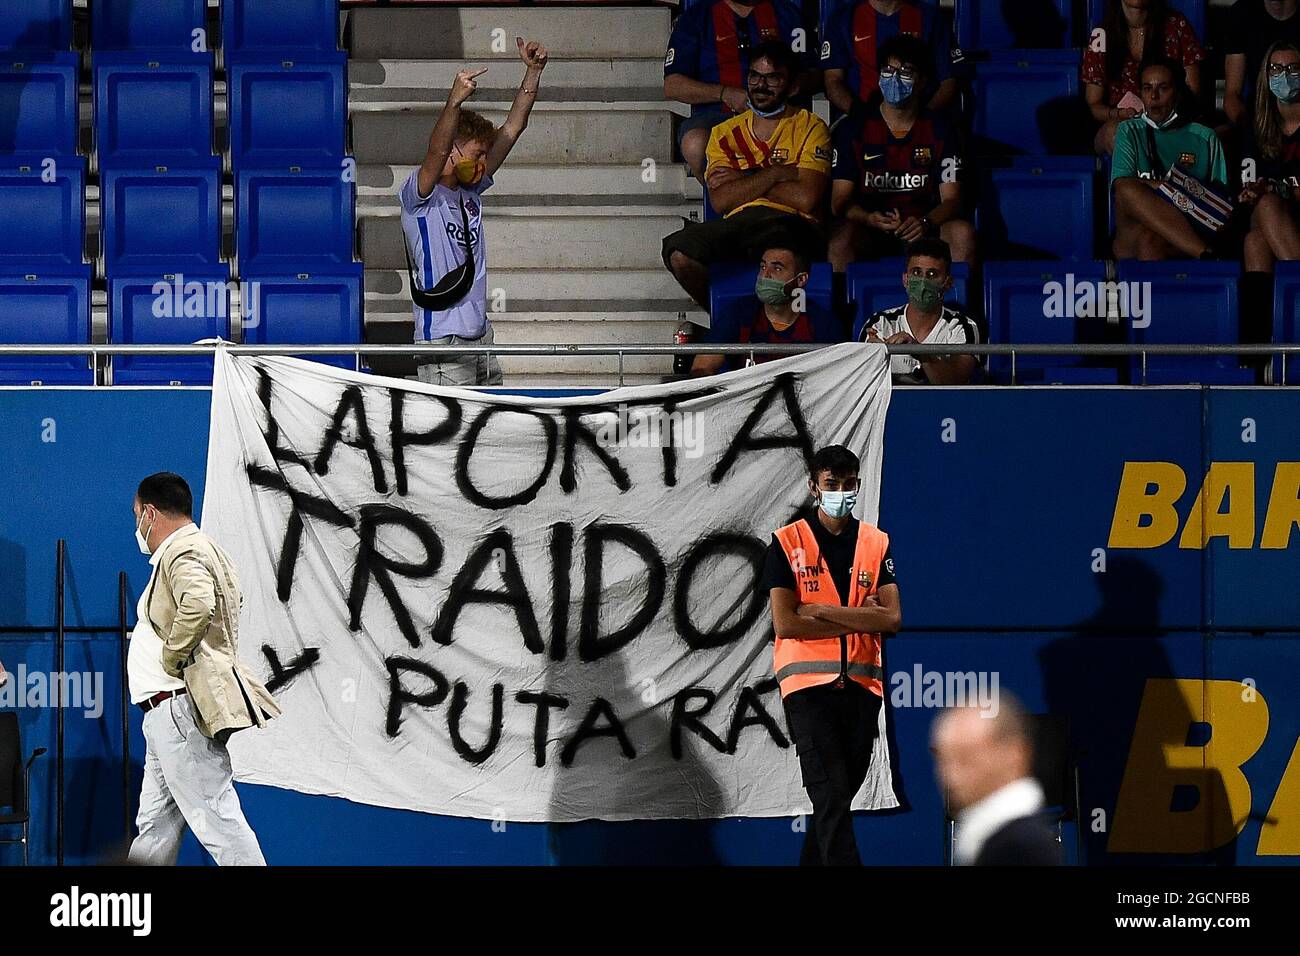 Sant Joan Despi, Spain. 08 August 2021. A banner against Joan Laporta is displayed by a FC Barcelona fan during the pre-season friendly football match between FC Barcelona and Juventus FC. FC Barcelona won 3-0 over Juventus FC. Credit: Nicolò Campo/Alamy Live News Stock Photo